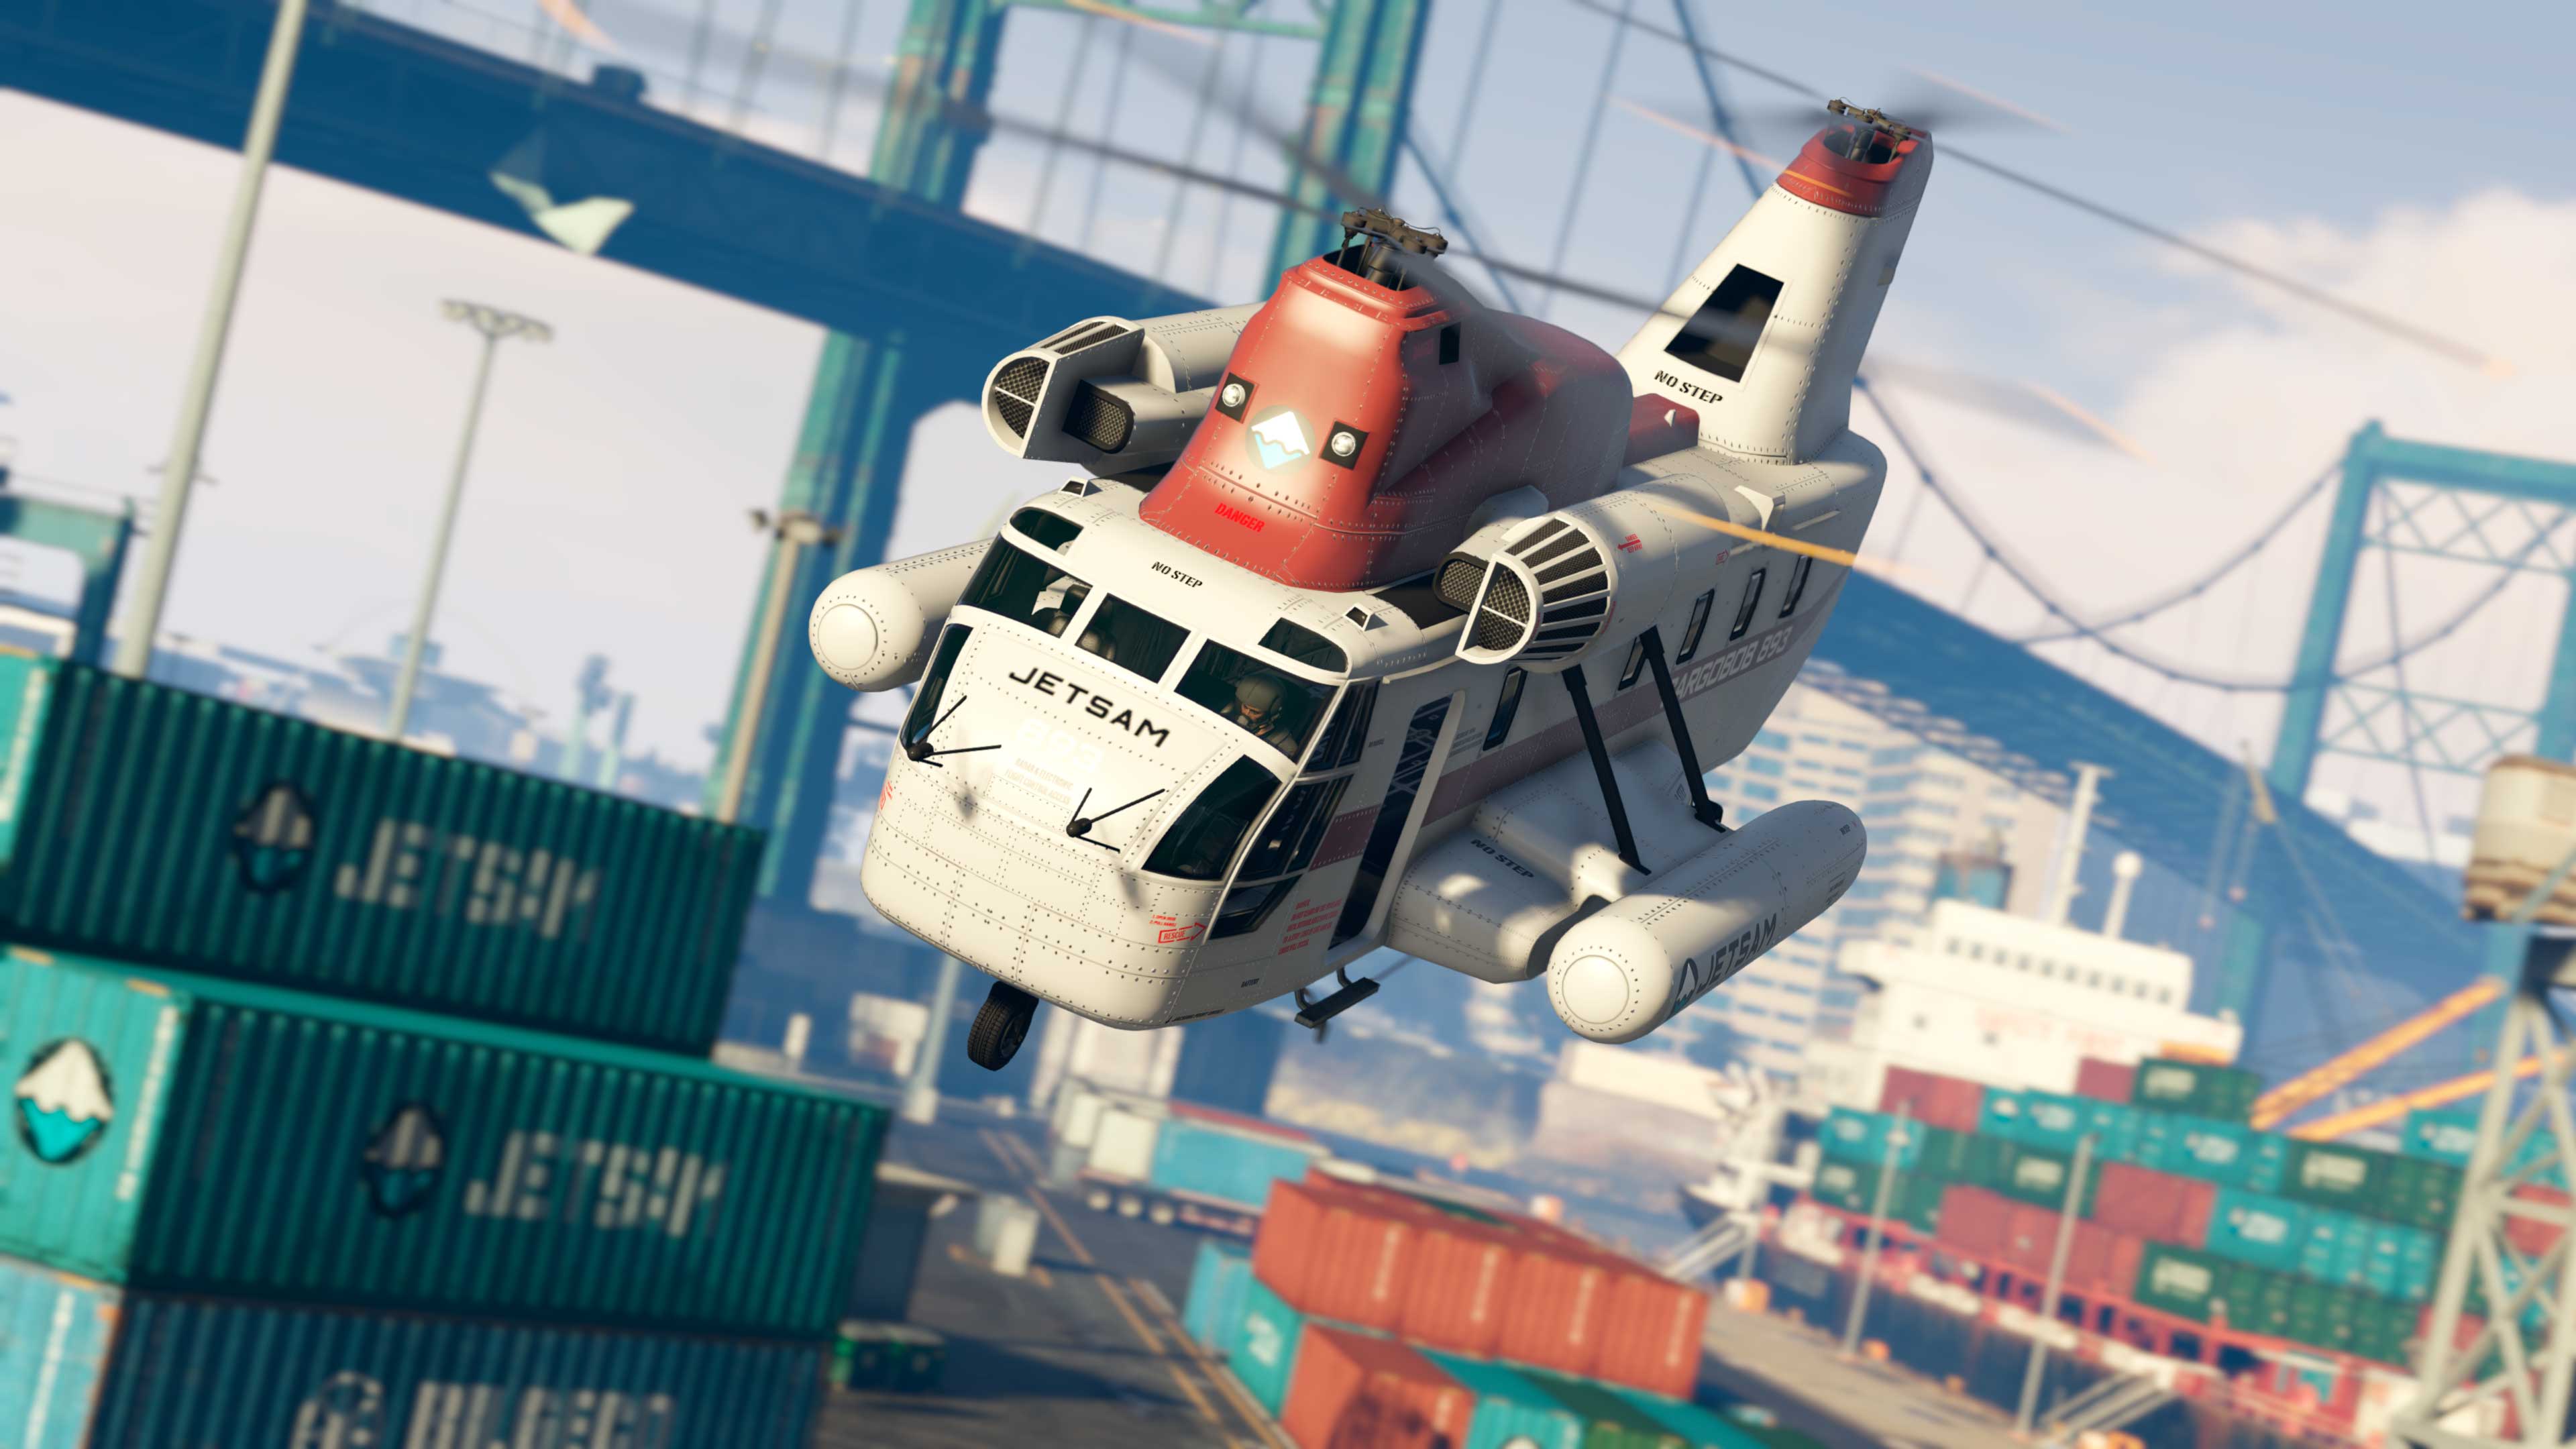 Ride Into the GTA Online Holiday Season with a Gift - Rockstar Games